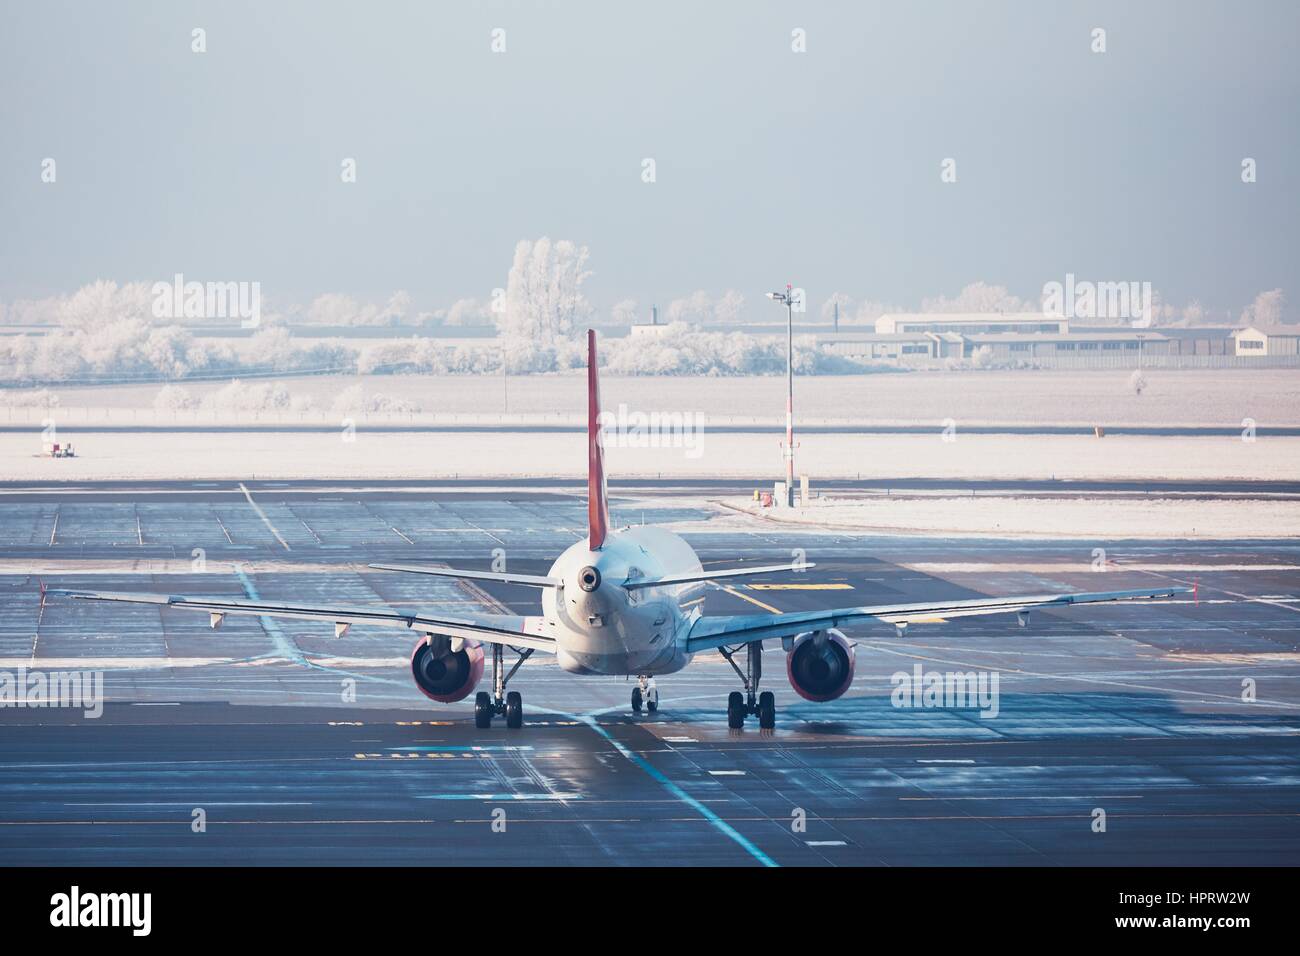 Airport in winter. Airplane is taxiing to the runway for take off. Stock Photo